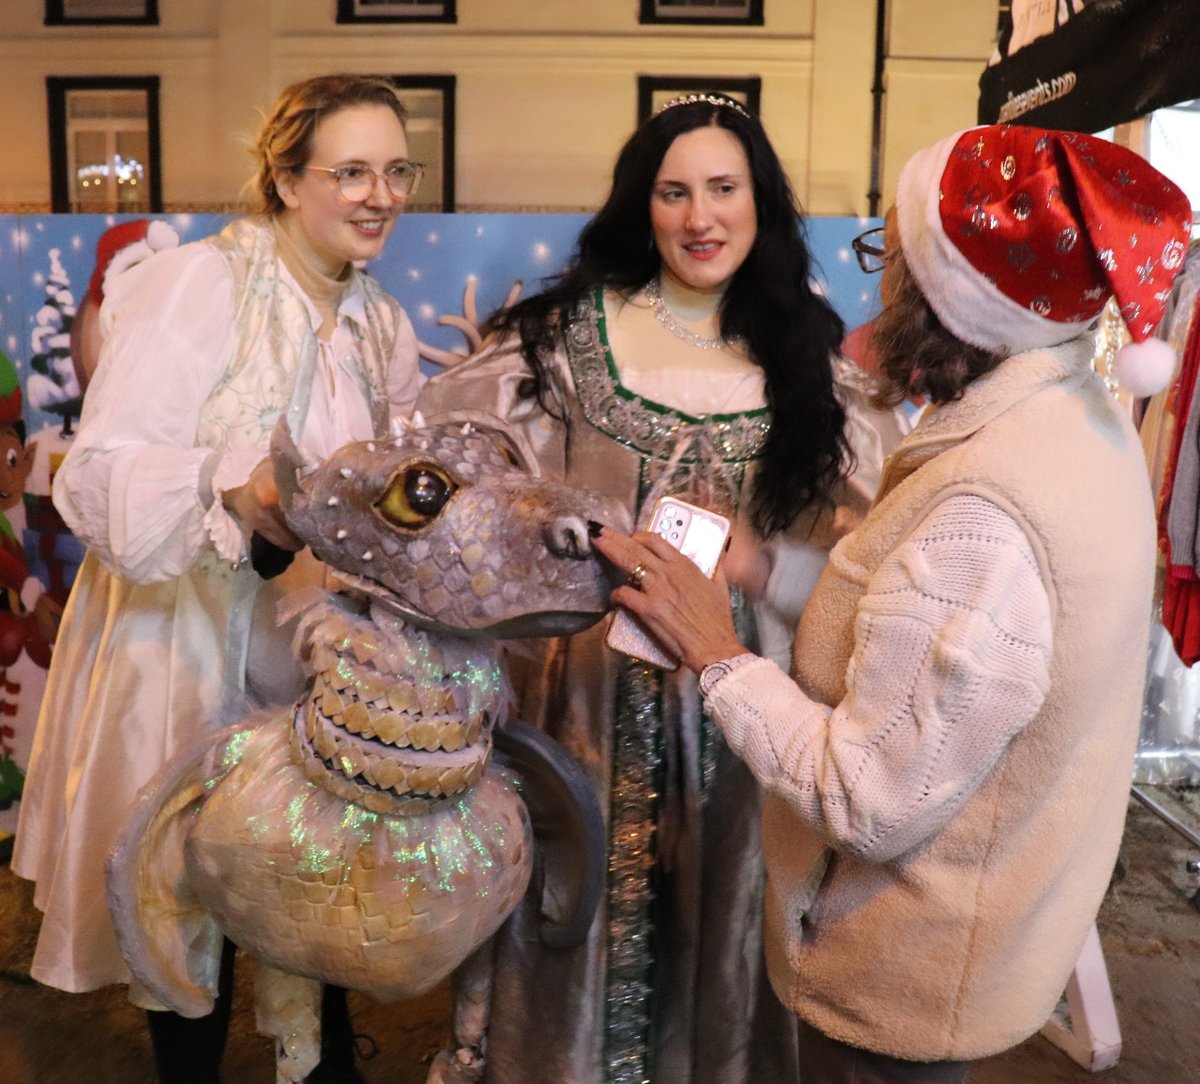 What a magical evening at The Big Reveal in @ThePantiles on Saturday! 🤩 Did anyone hear our amazing Cinderella @NHoeberigs singing? ✨👠✨ Or did you manage to say hello to the snow-breathing dragon Hiccups? ❄️🐉  @rtwtogether 😍